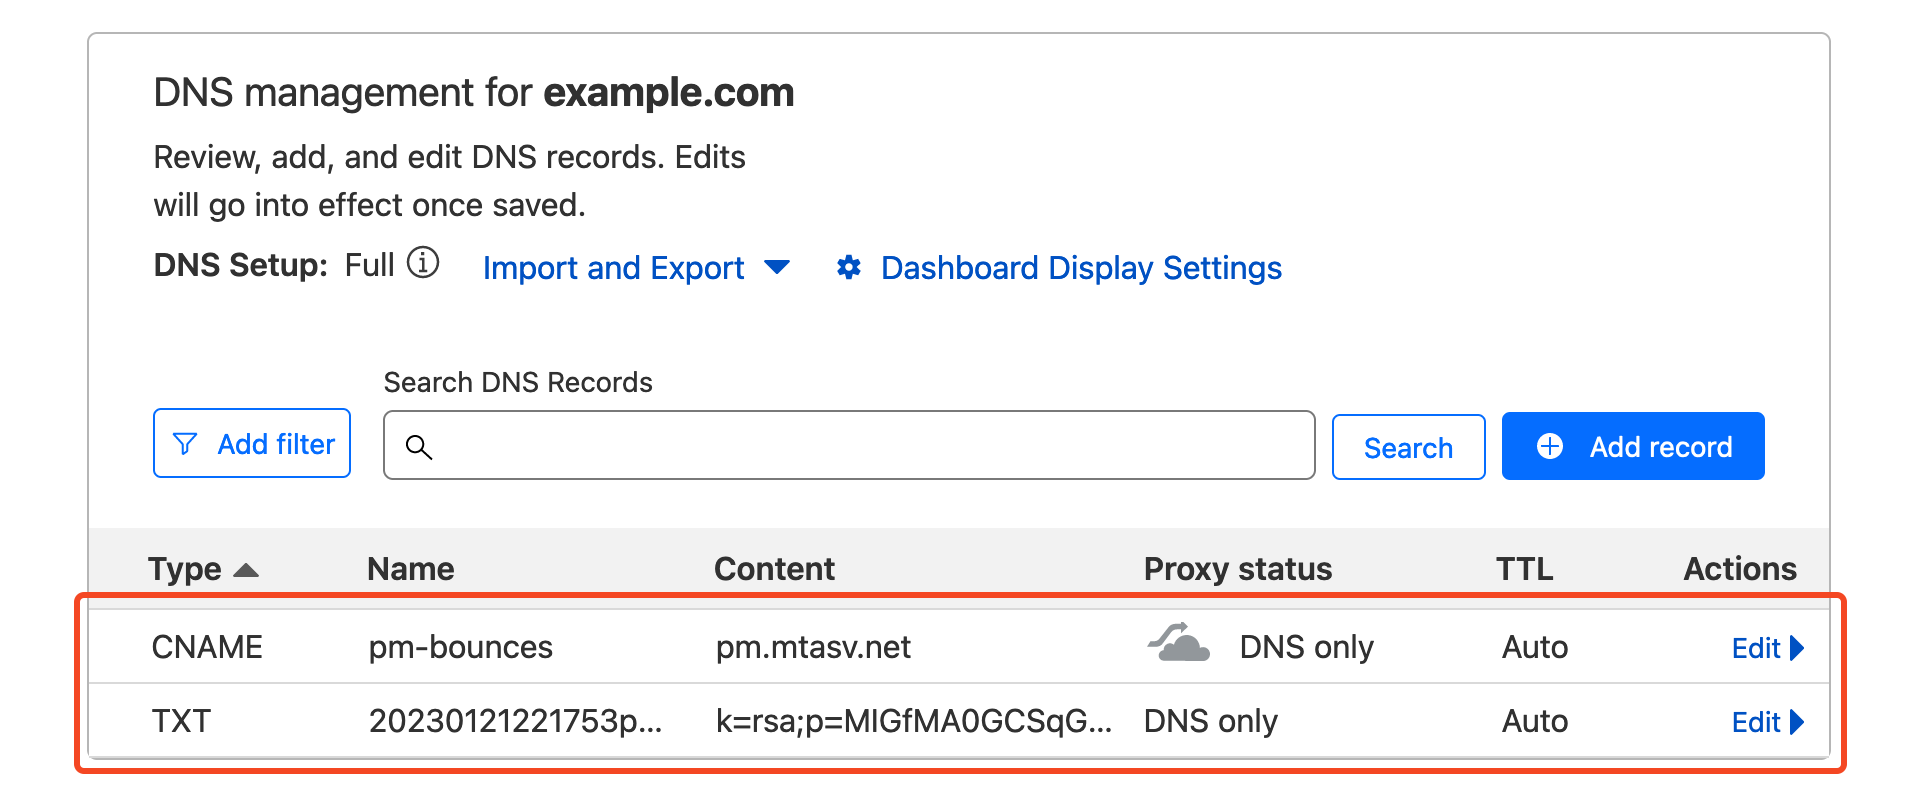 Image of adding DNS records to a Cloudflare domain